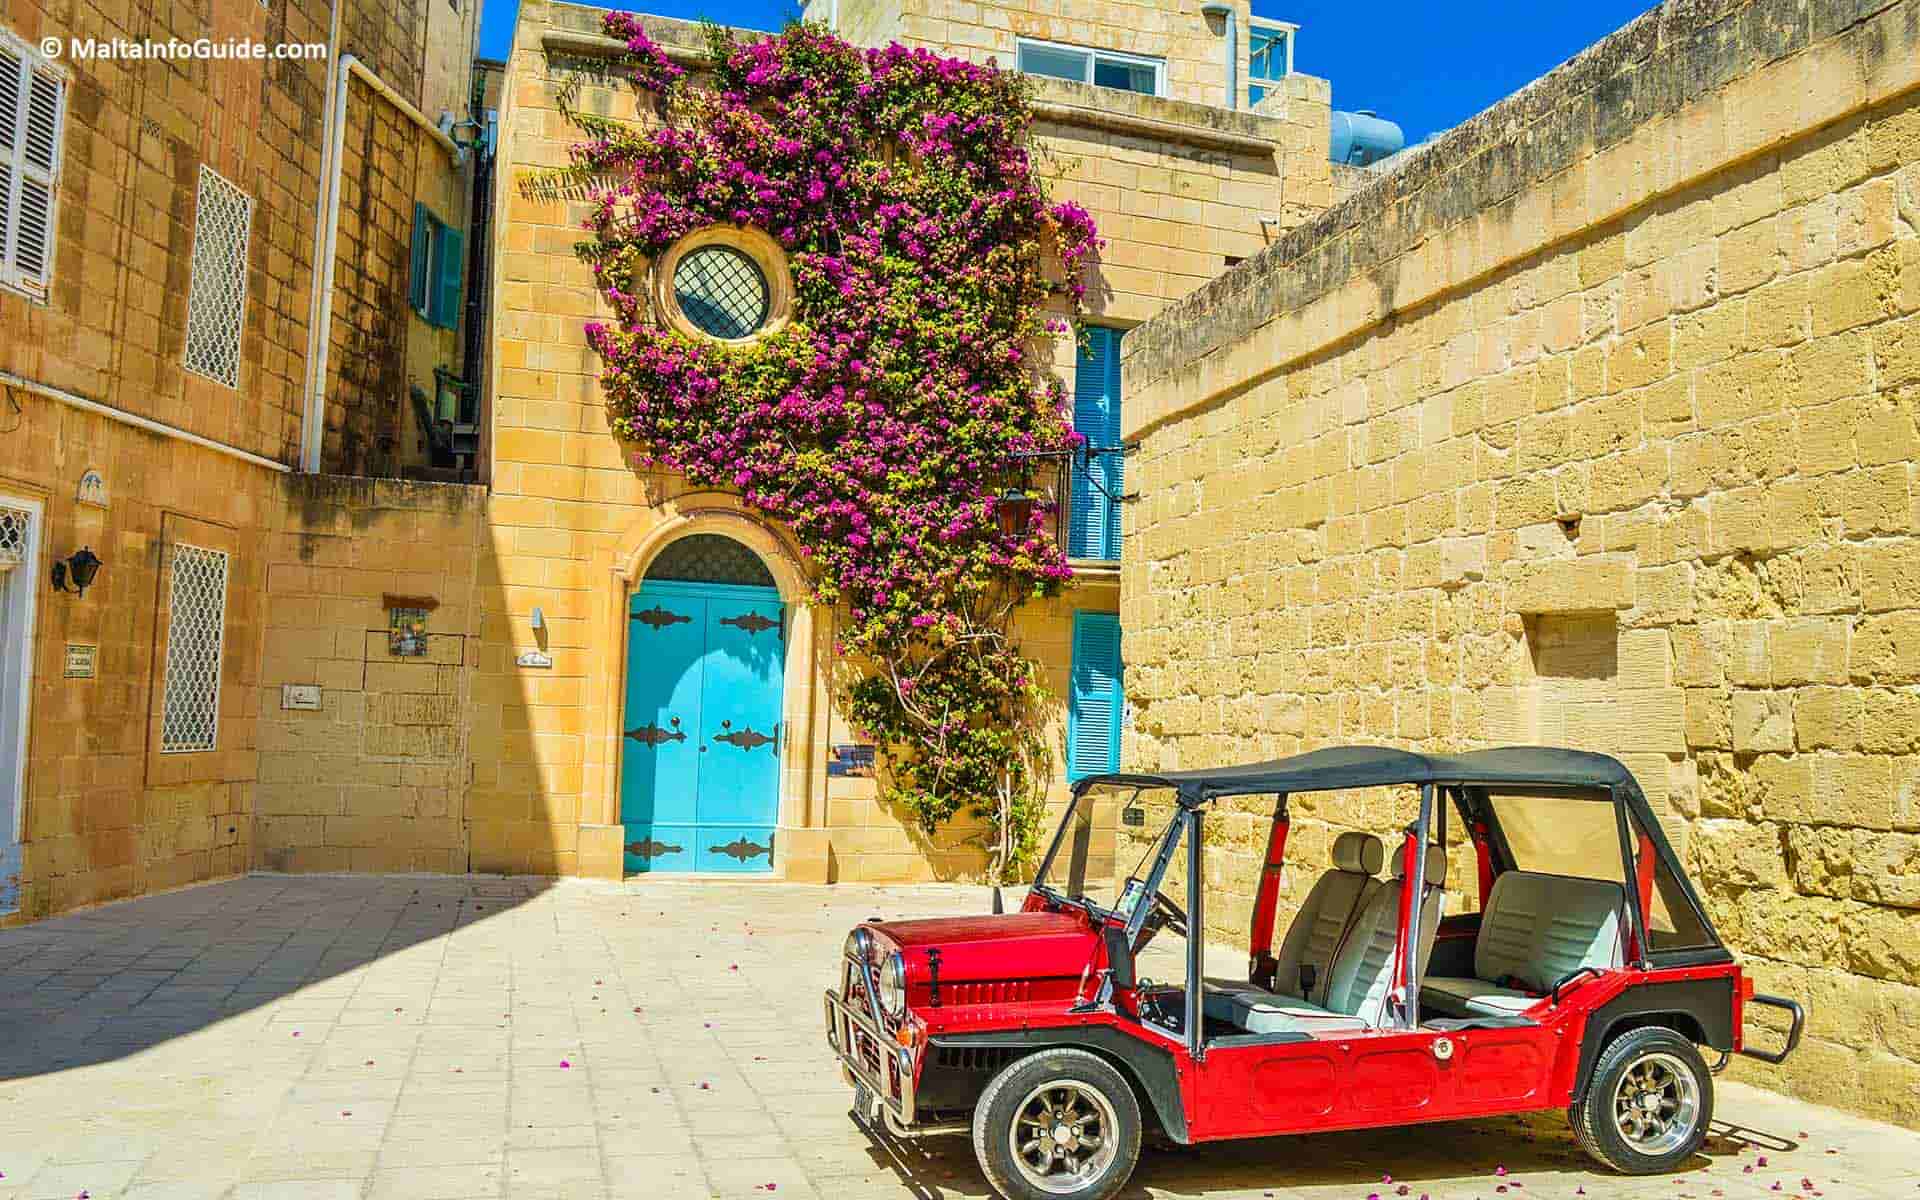 A townhouse in the heart of Mdina Malta with an antique car parked beside it.